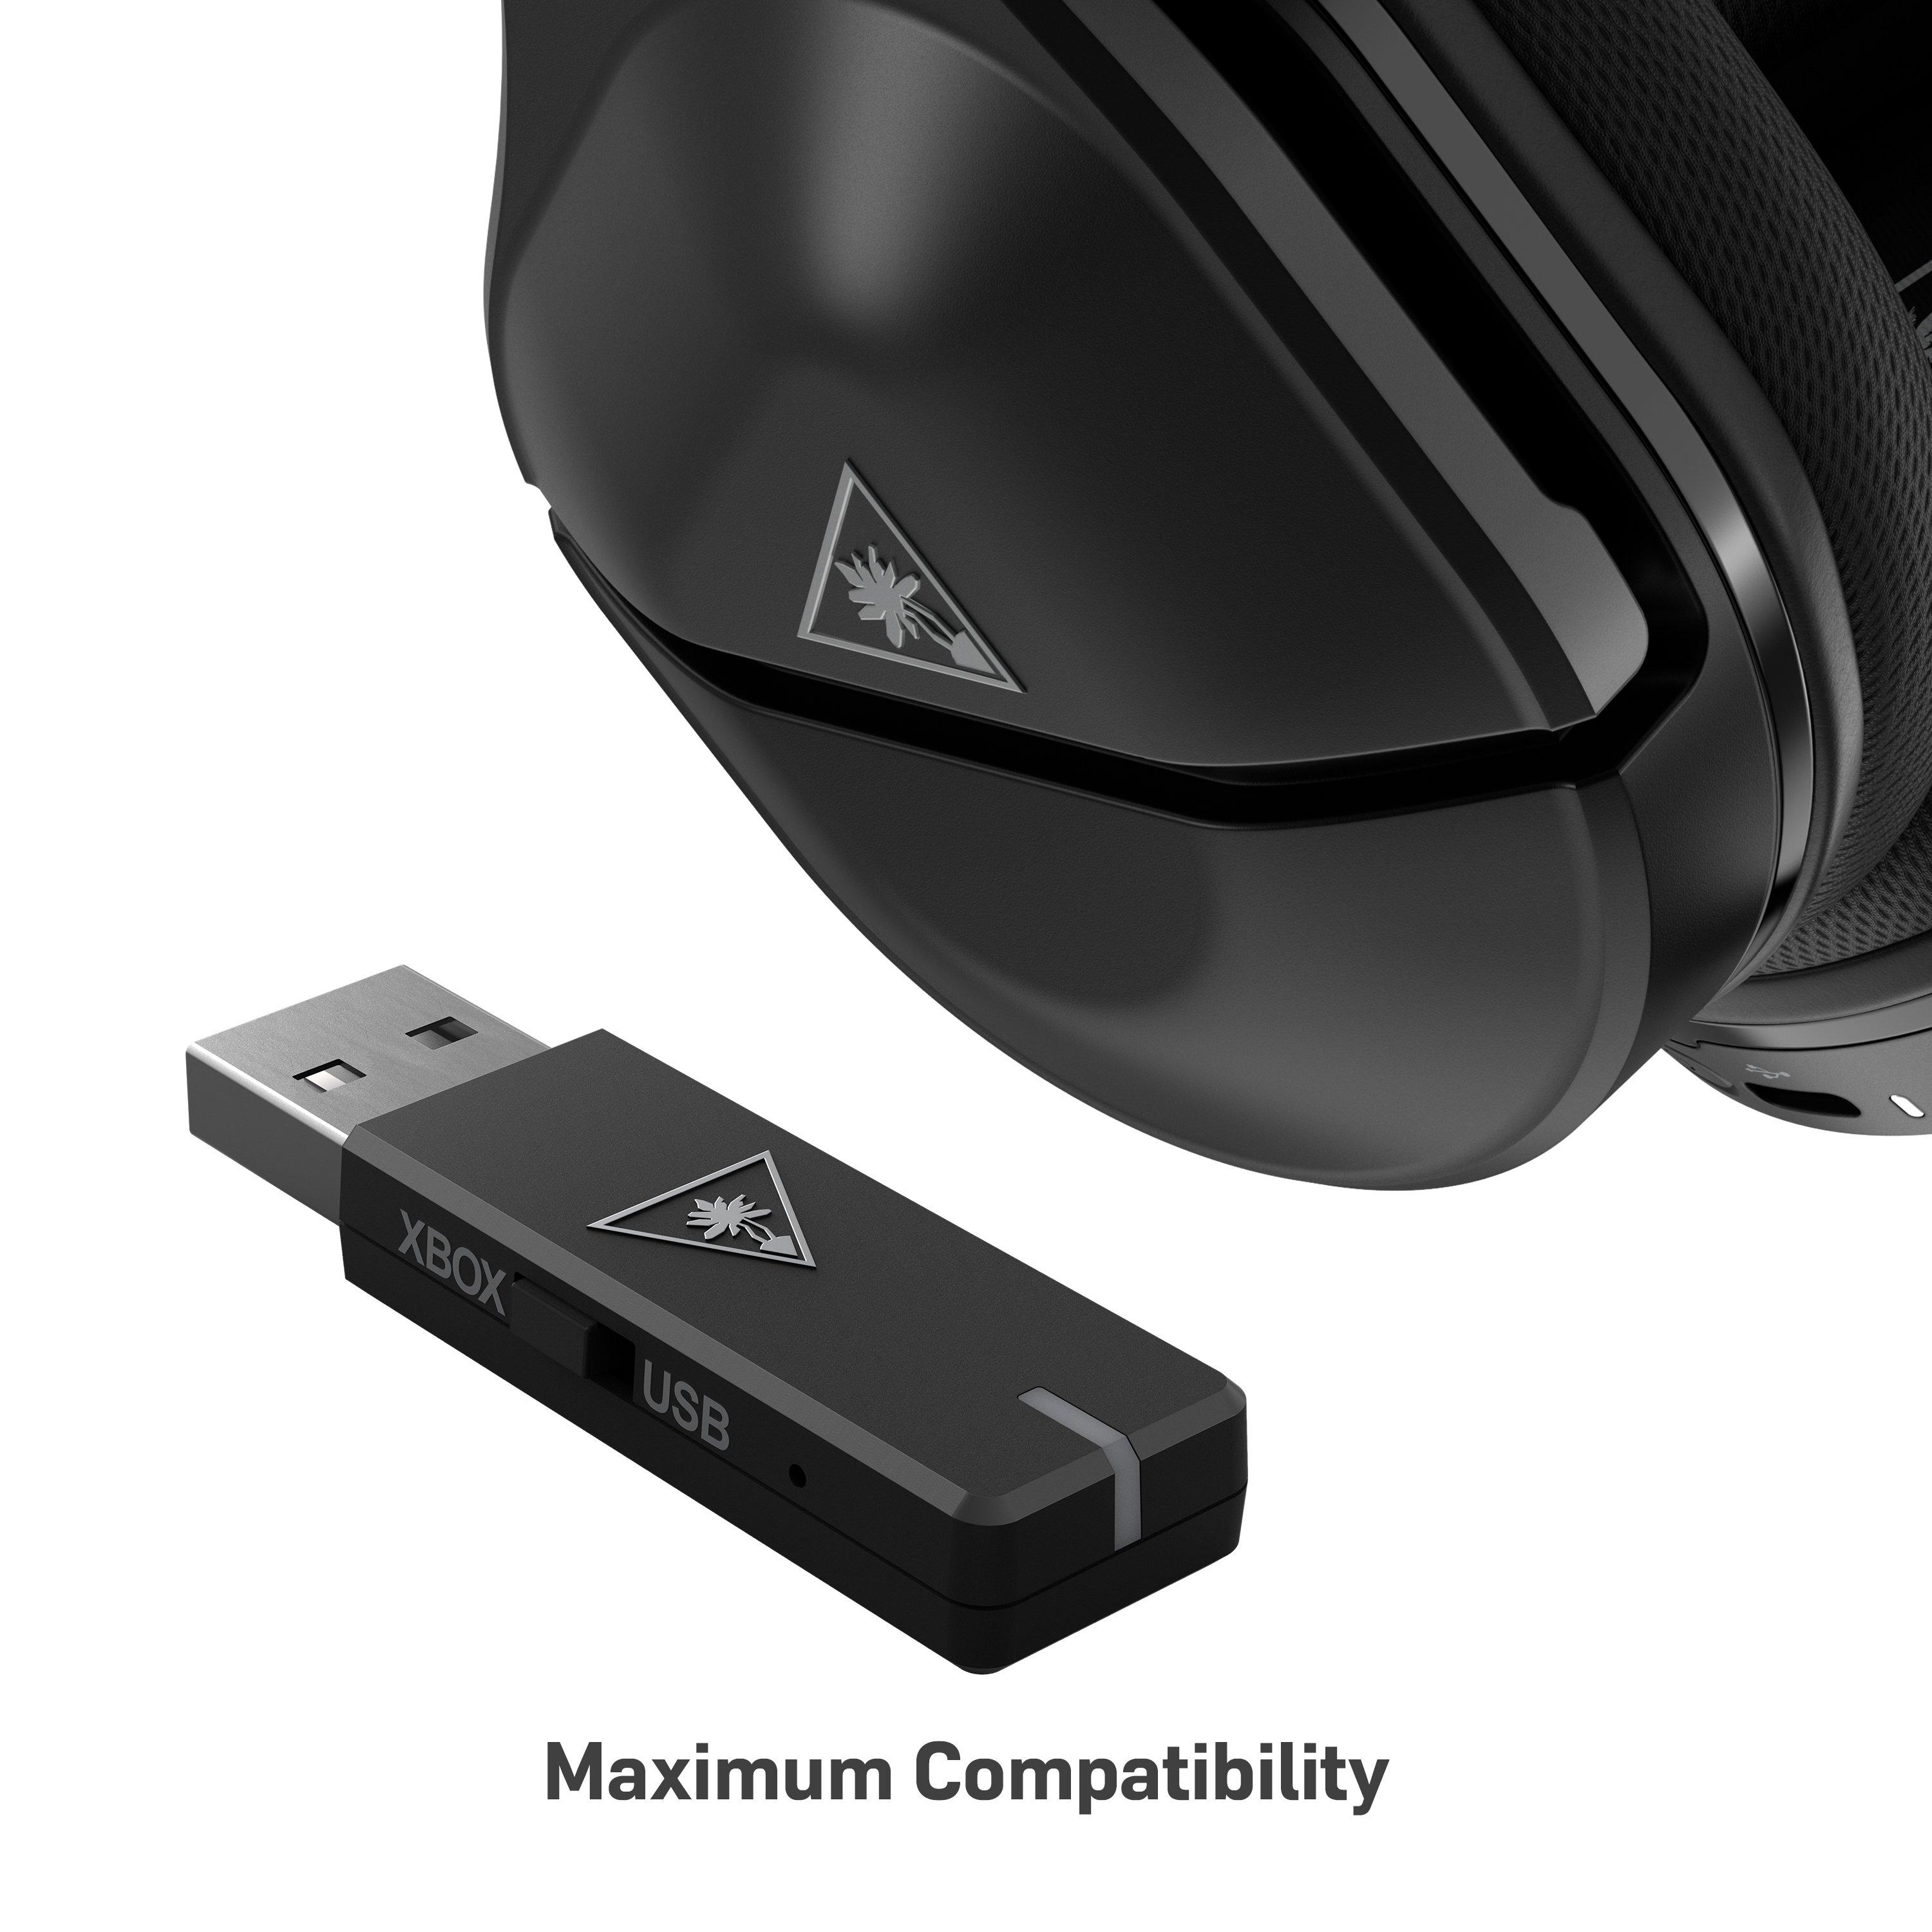  Turtle Beach Stealth 600 Gen 2 MAX Wireless Multiplatform  Amplified Gaming Headset for Xbox Series X